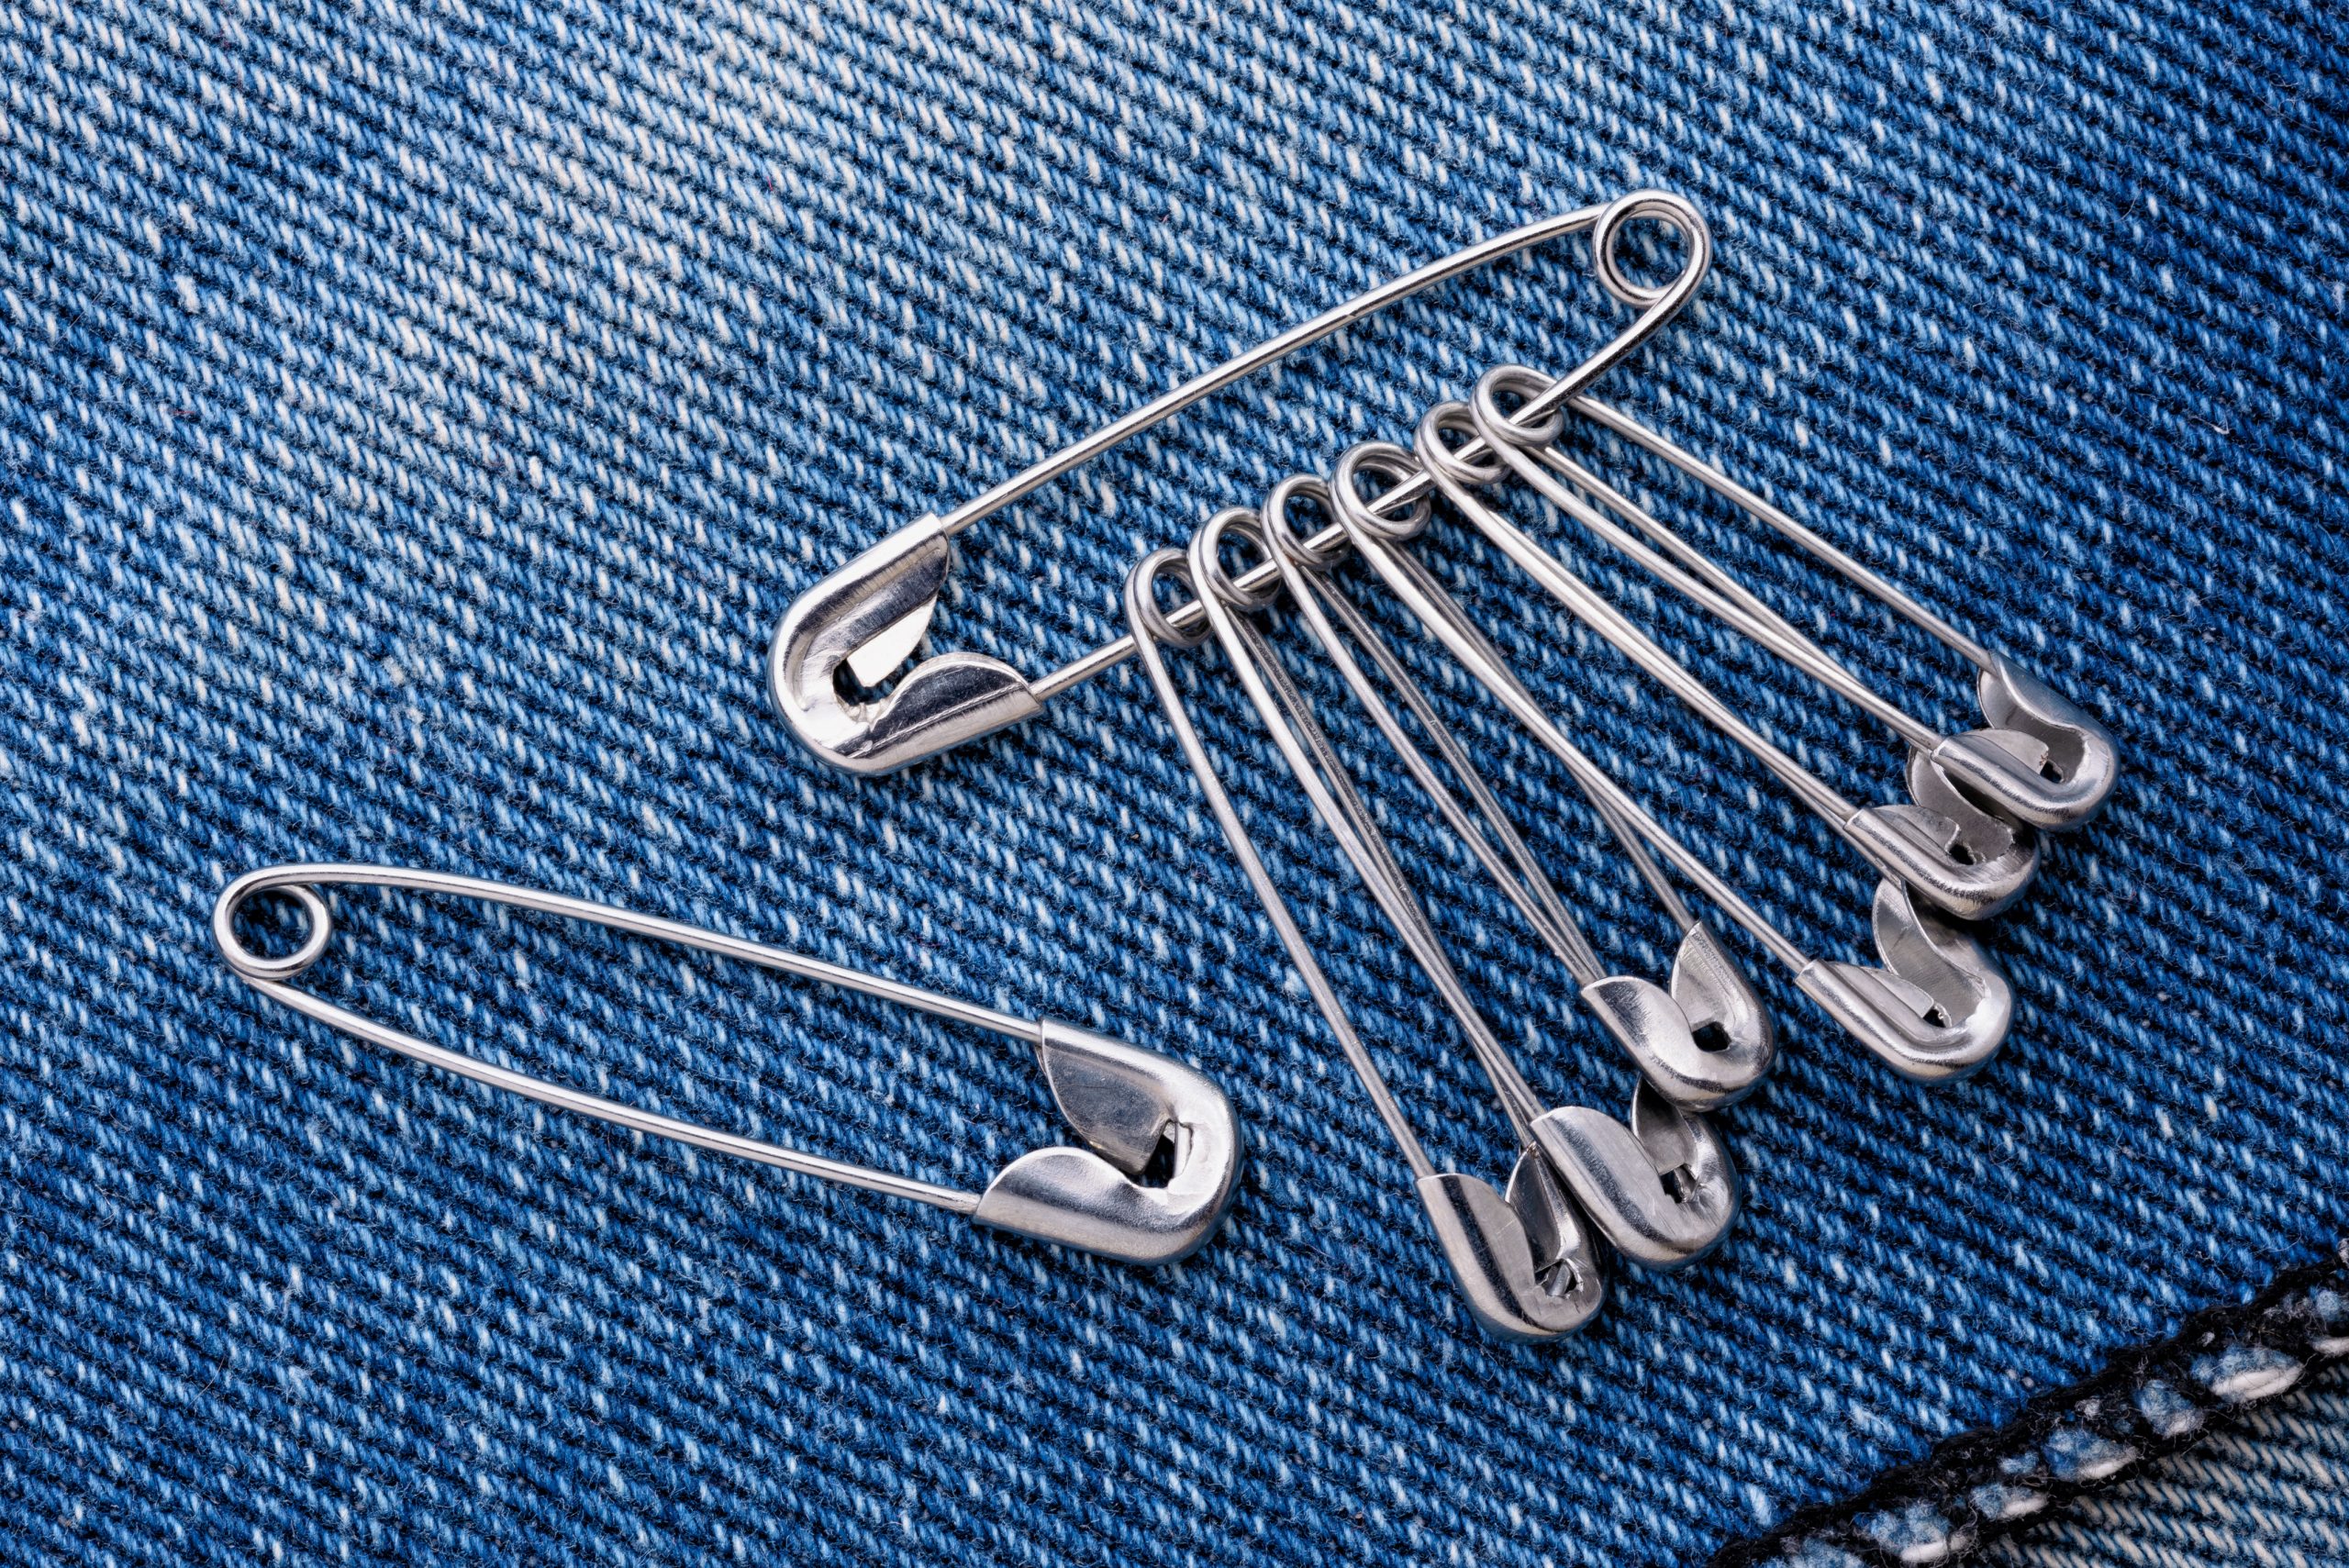 Singer Black and White Safety Pins, Assorted Sizes, 3-Pack